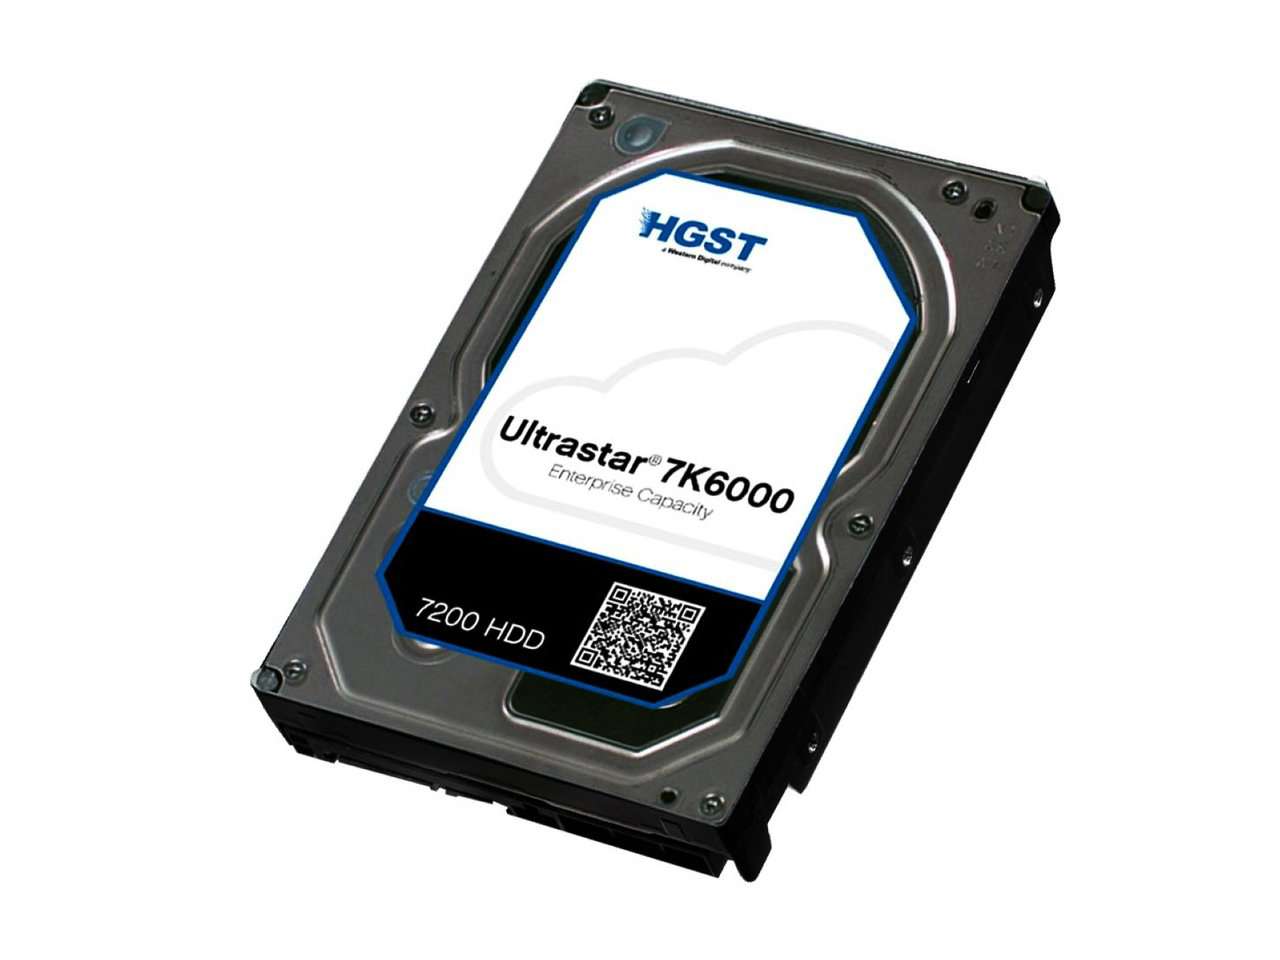 HGST Ultrastar 7K6000 0F22820  HUS726060AL4215 6TB 7.2K RPM SAS 12Gb/s 4Kn 128MB Cache 3.5" TCG FIPS HDD